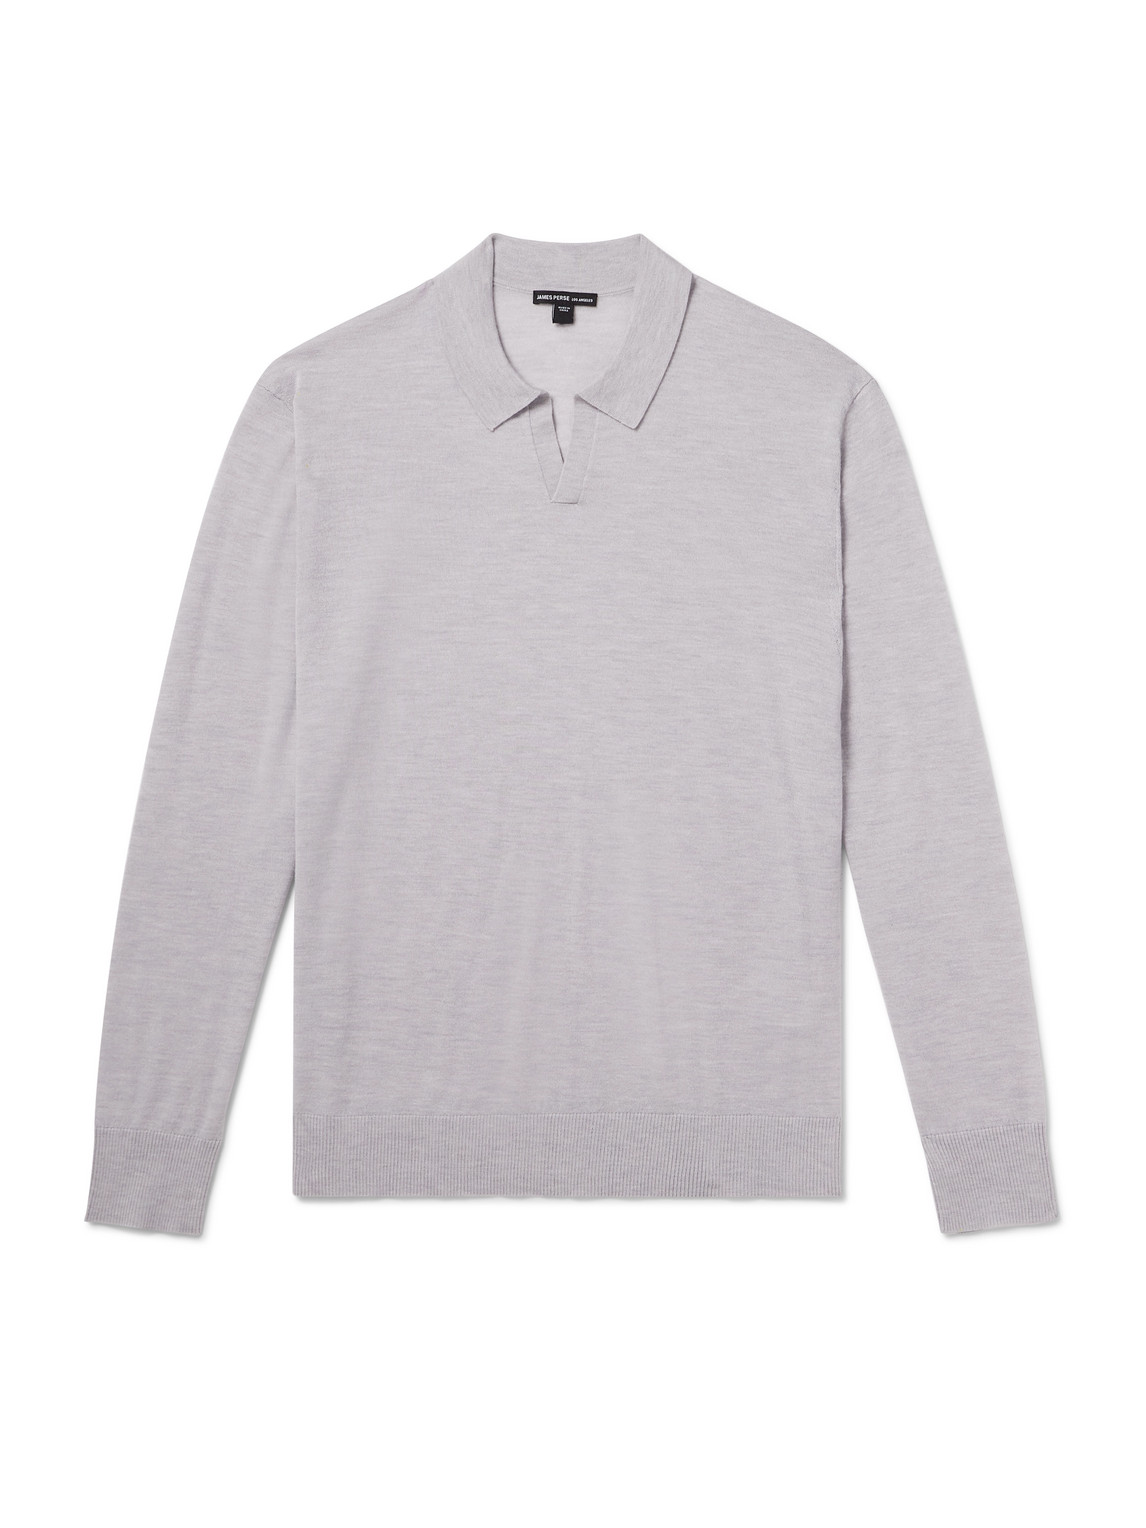 James Perse Cashmere Polo Shirt In Gray